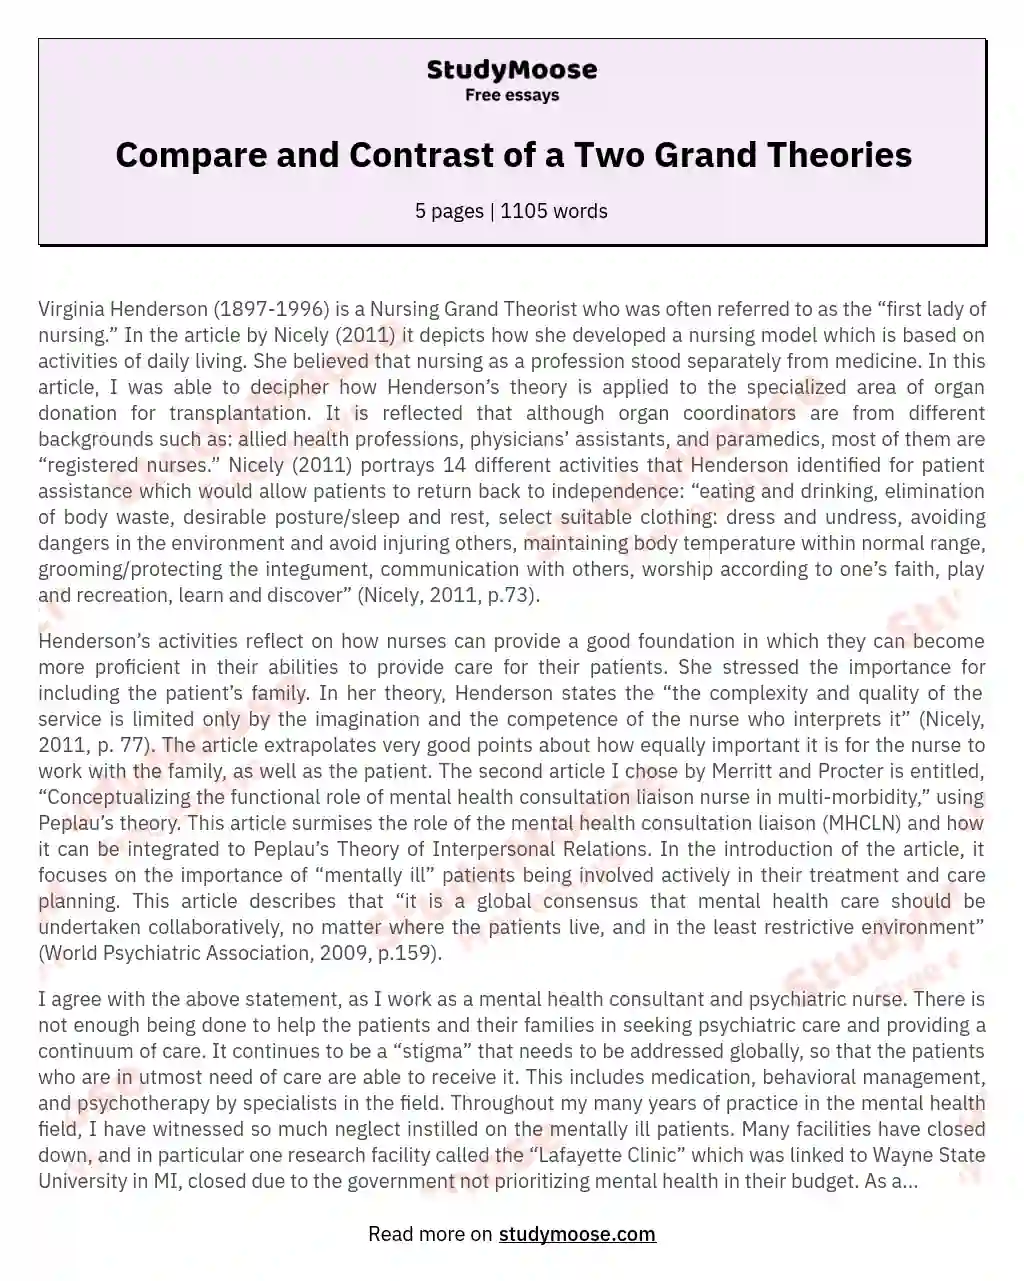 Compare and Contrast of a Two Grand Theories essay